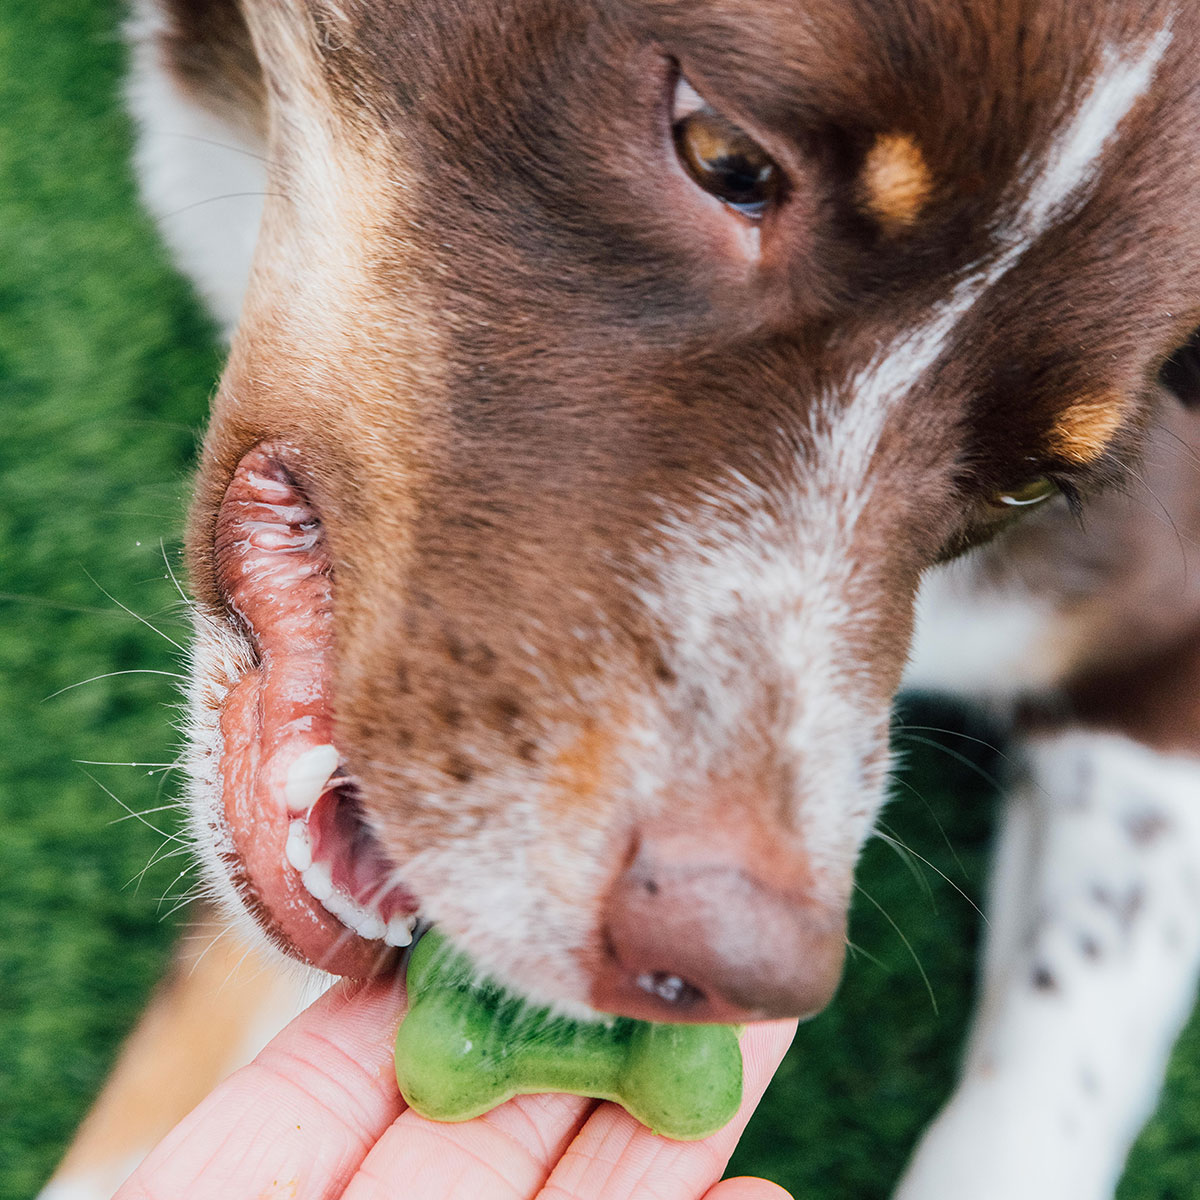 A dog eating a homemade breath mint out of a hand.